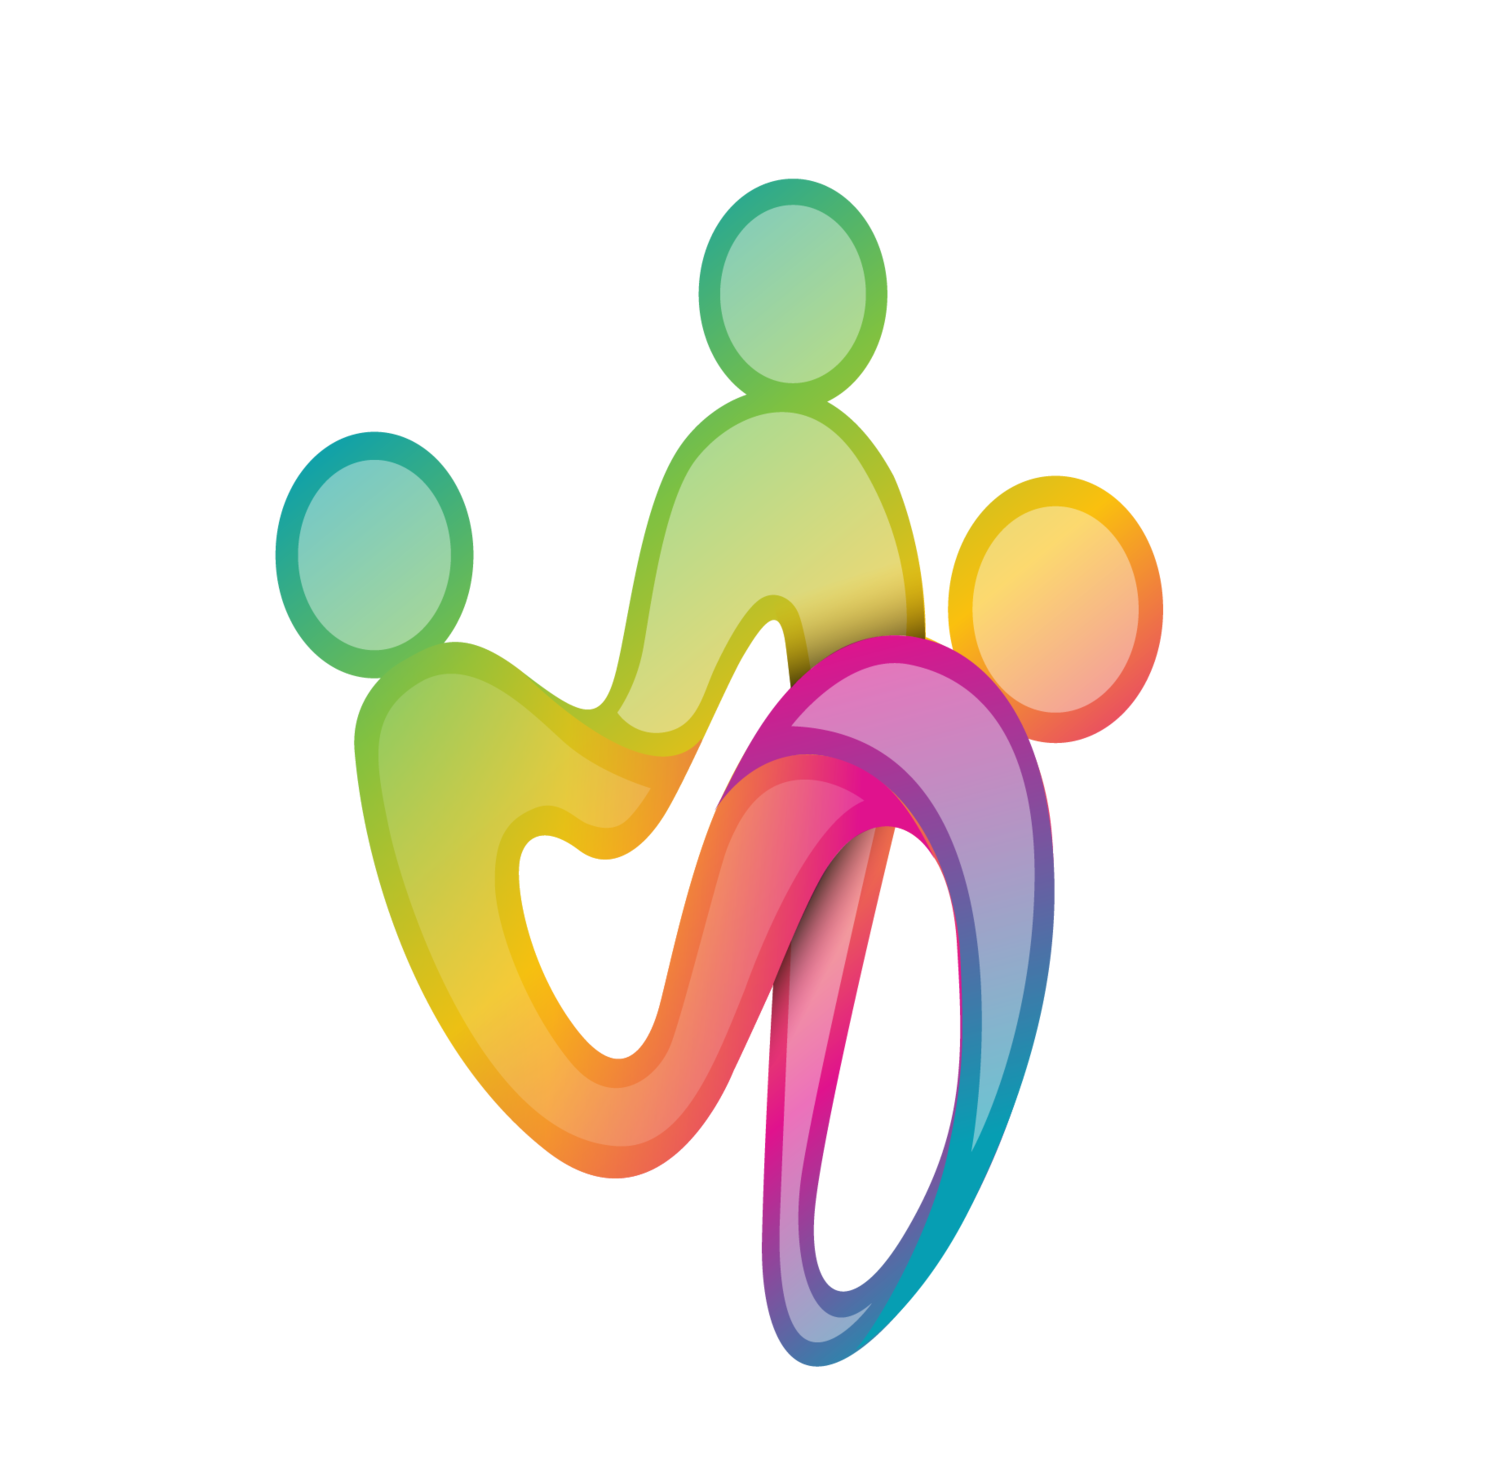 Stepping Stone Community Services